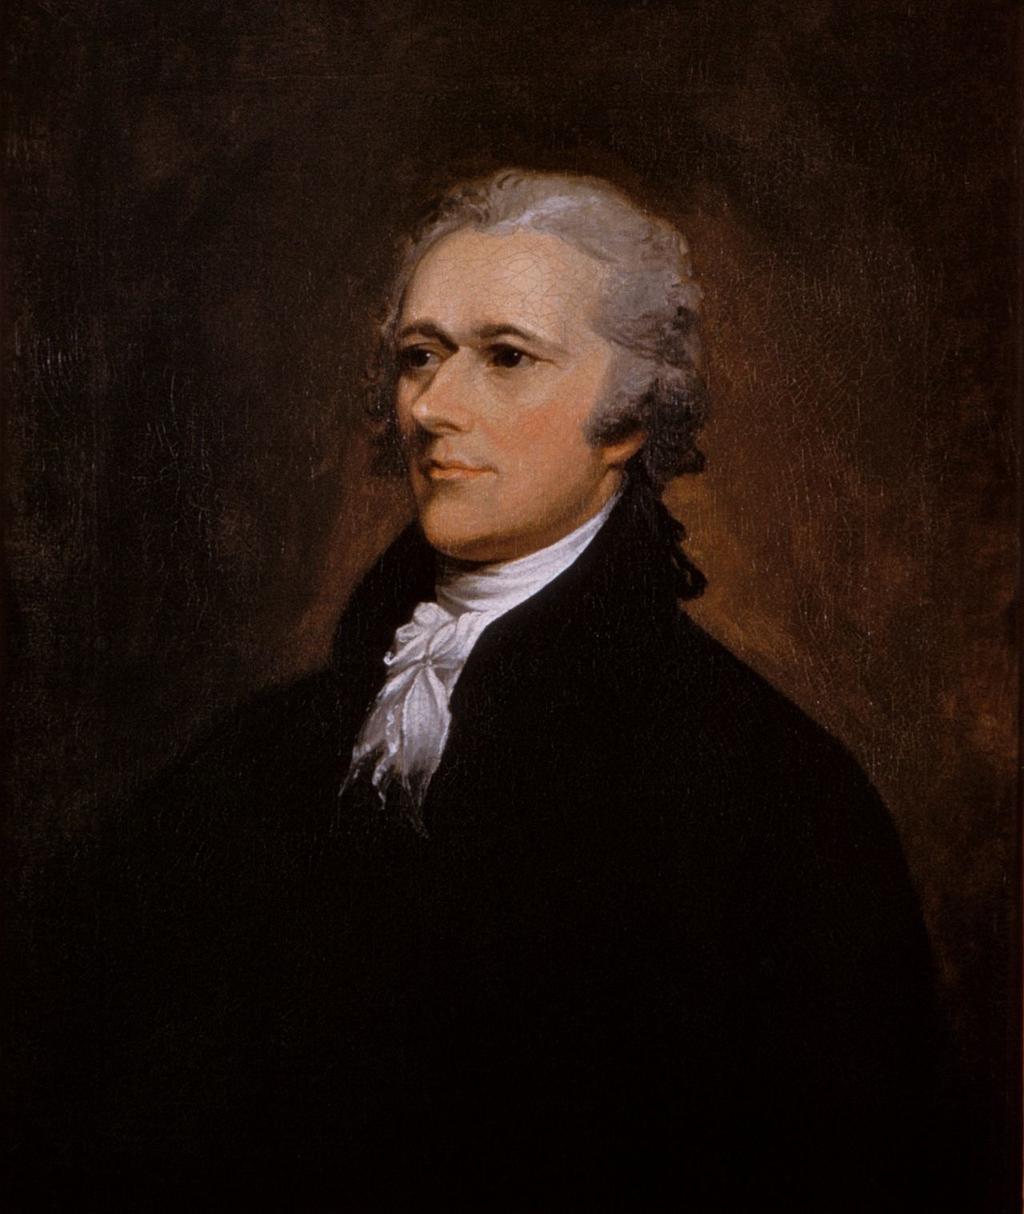 Hamilton s method The Constitution explicitly specified the initial apportionment to the States, but it became an issue for Congress in 1791.